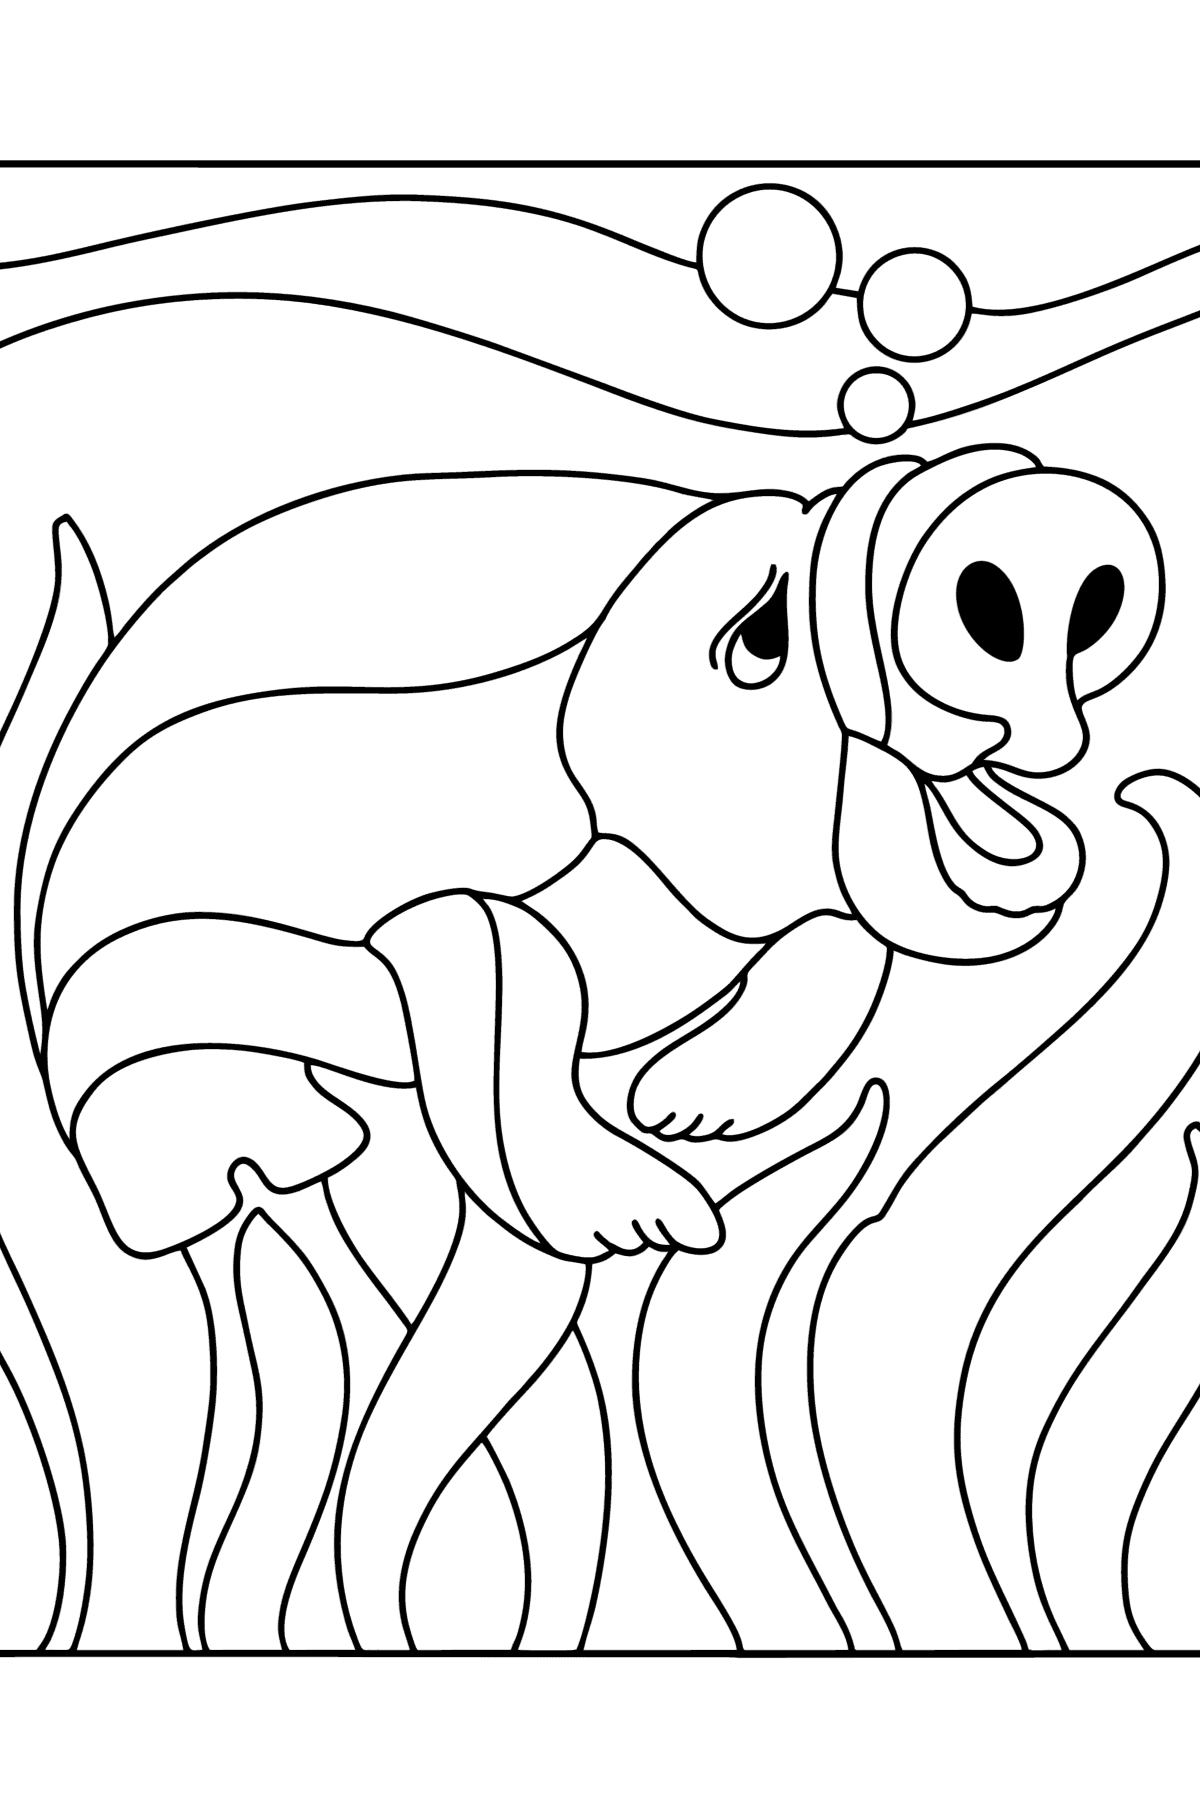 Stellar Cow coloring page - Coloring Pages for Kids